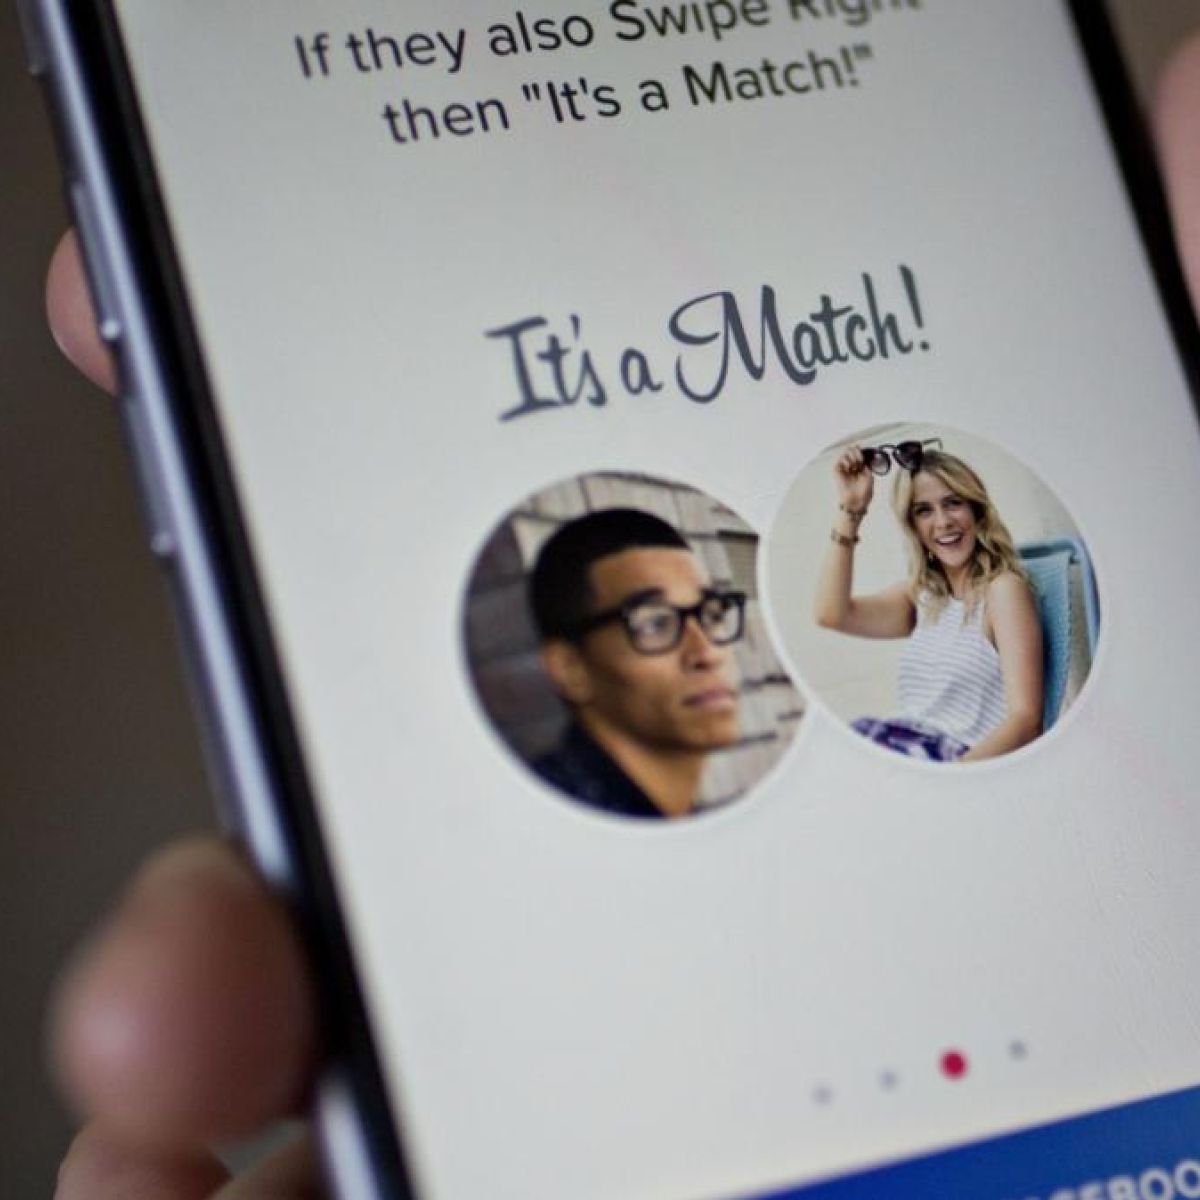 Dating apps move past their shaky start - The Irish Times